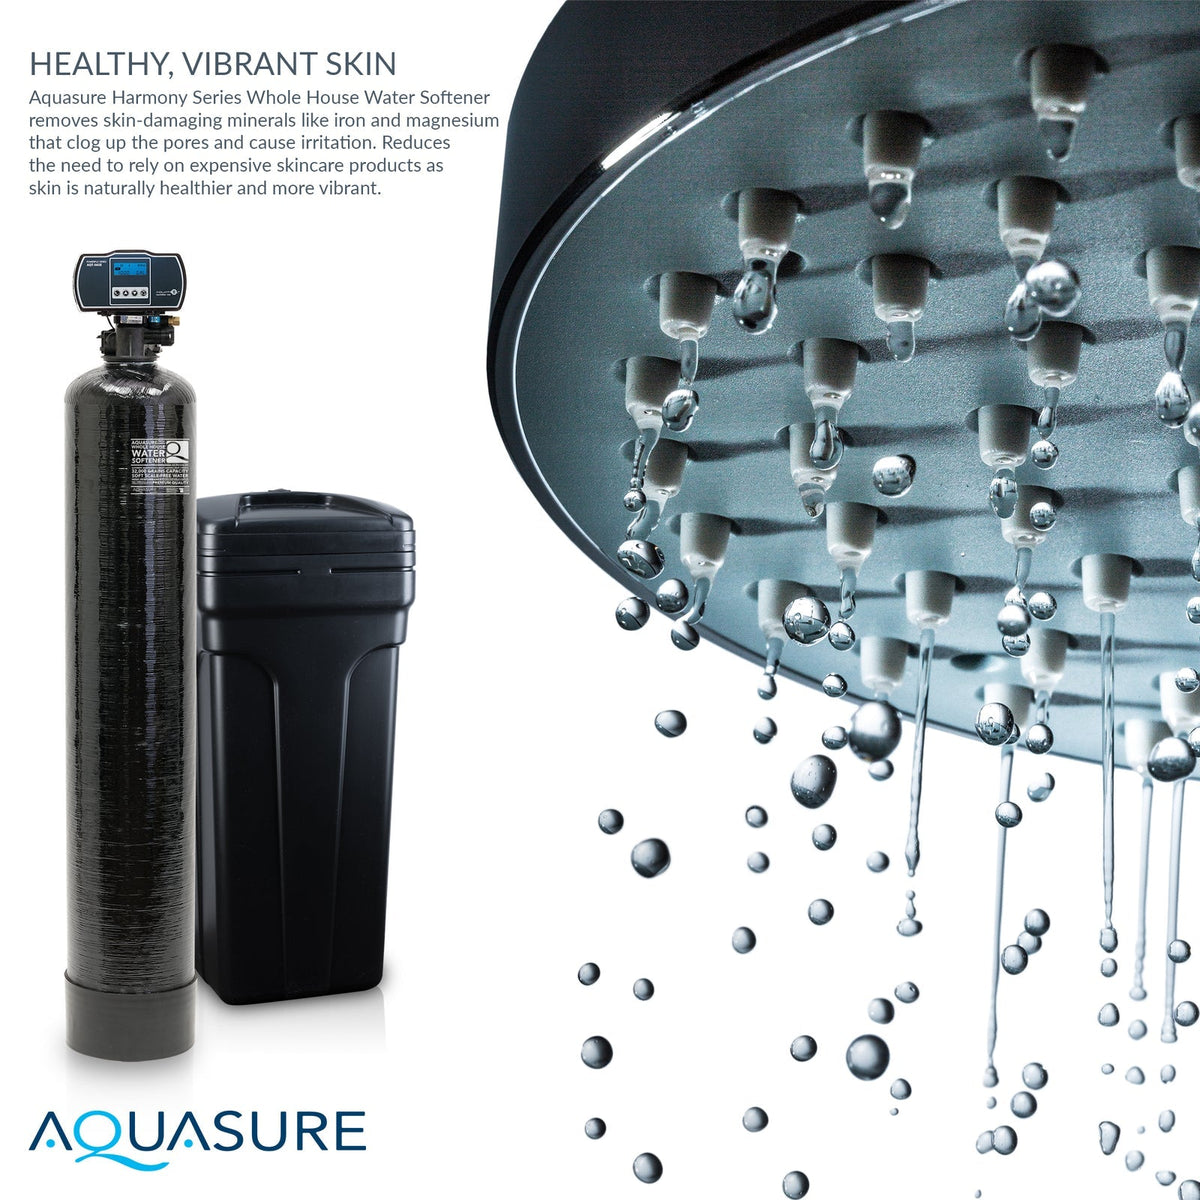 Aquasure AS-HS32FM Harmony Series 32,000 Grain Water Softener with Fine Mesh Resin for Iron Removal New